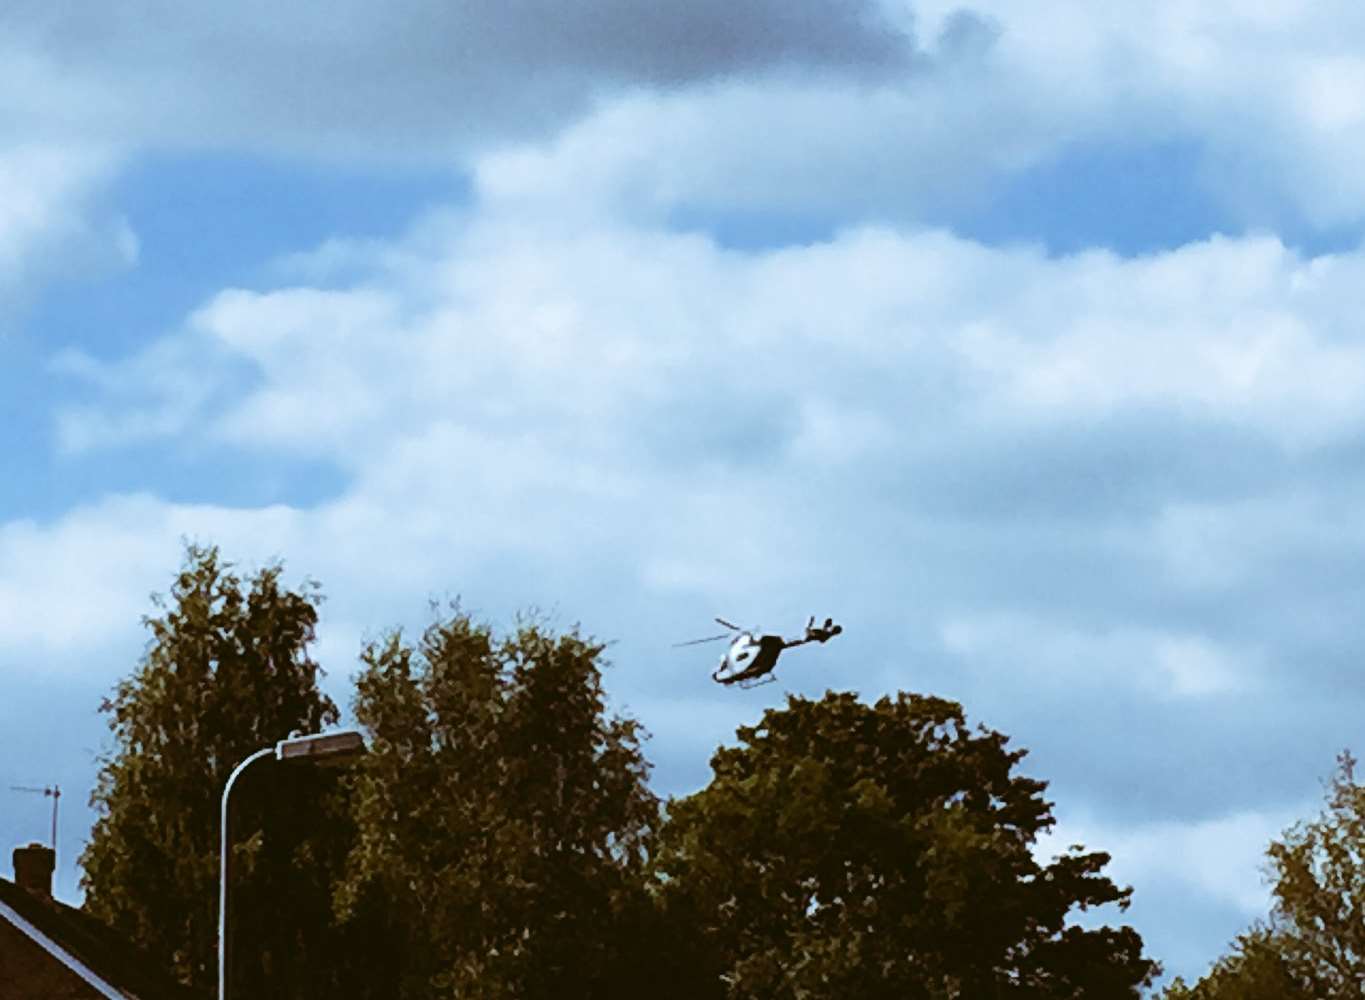 The air ambulance over Tonbirdge. Picture: @NPAS_Redhill